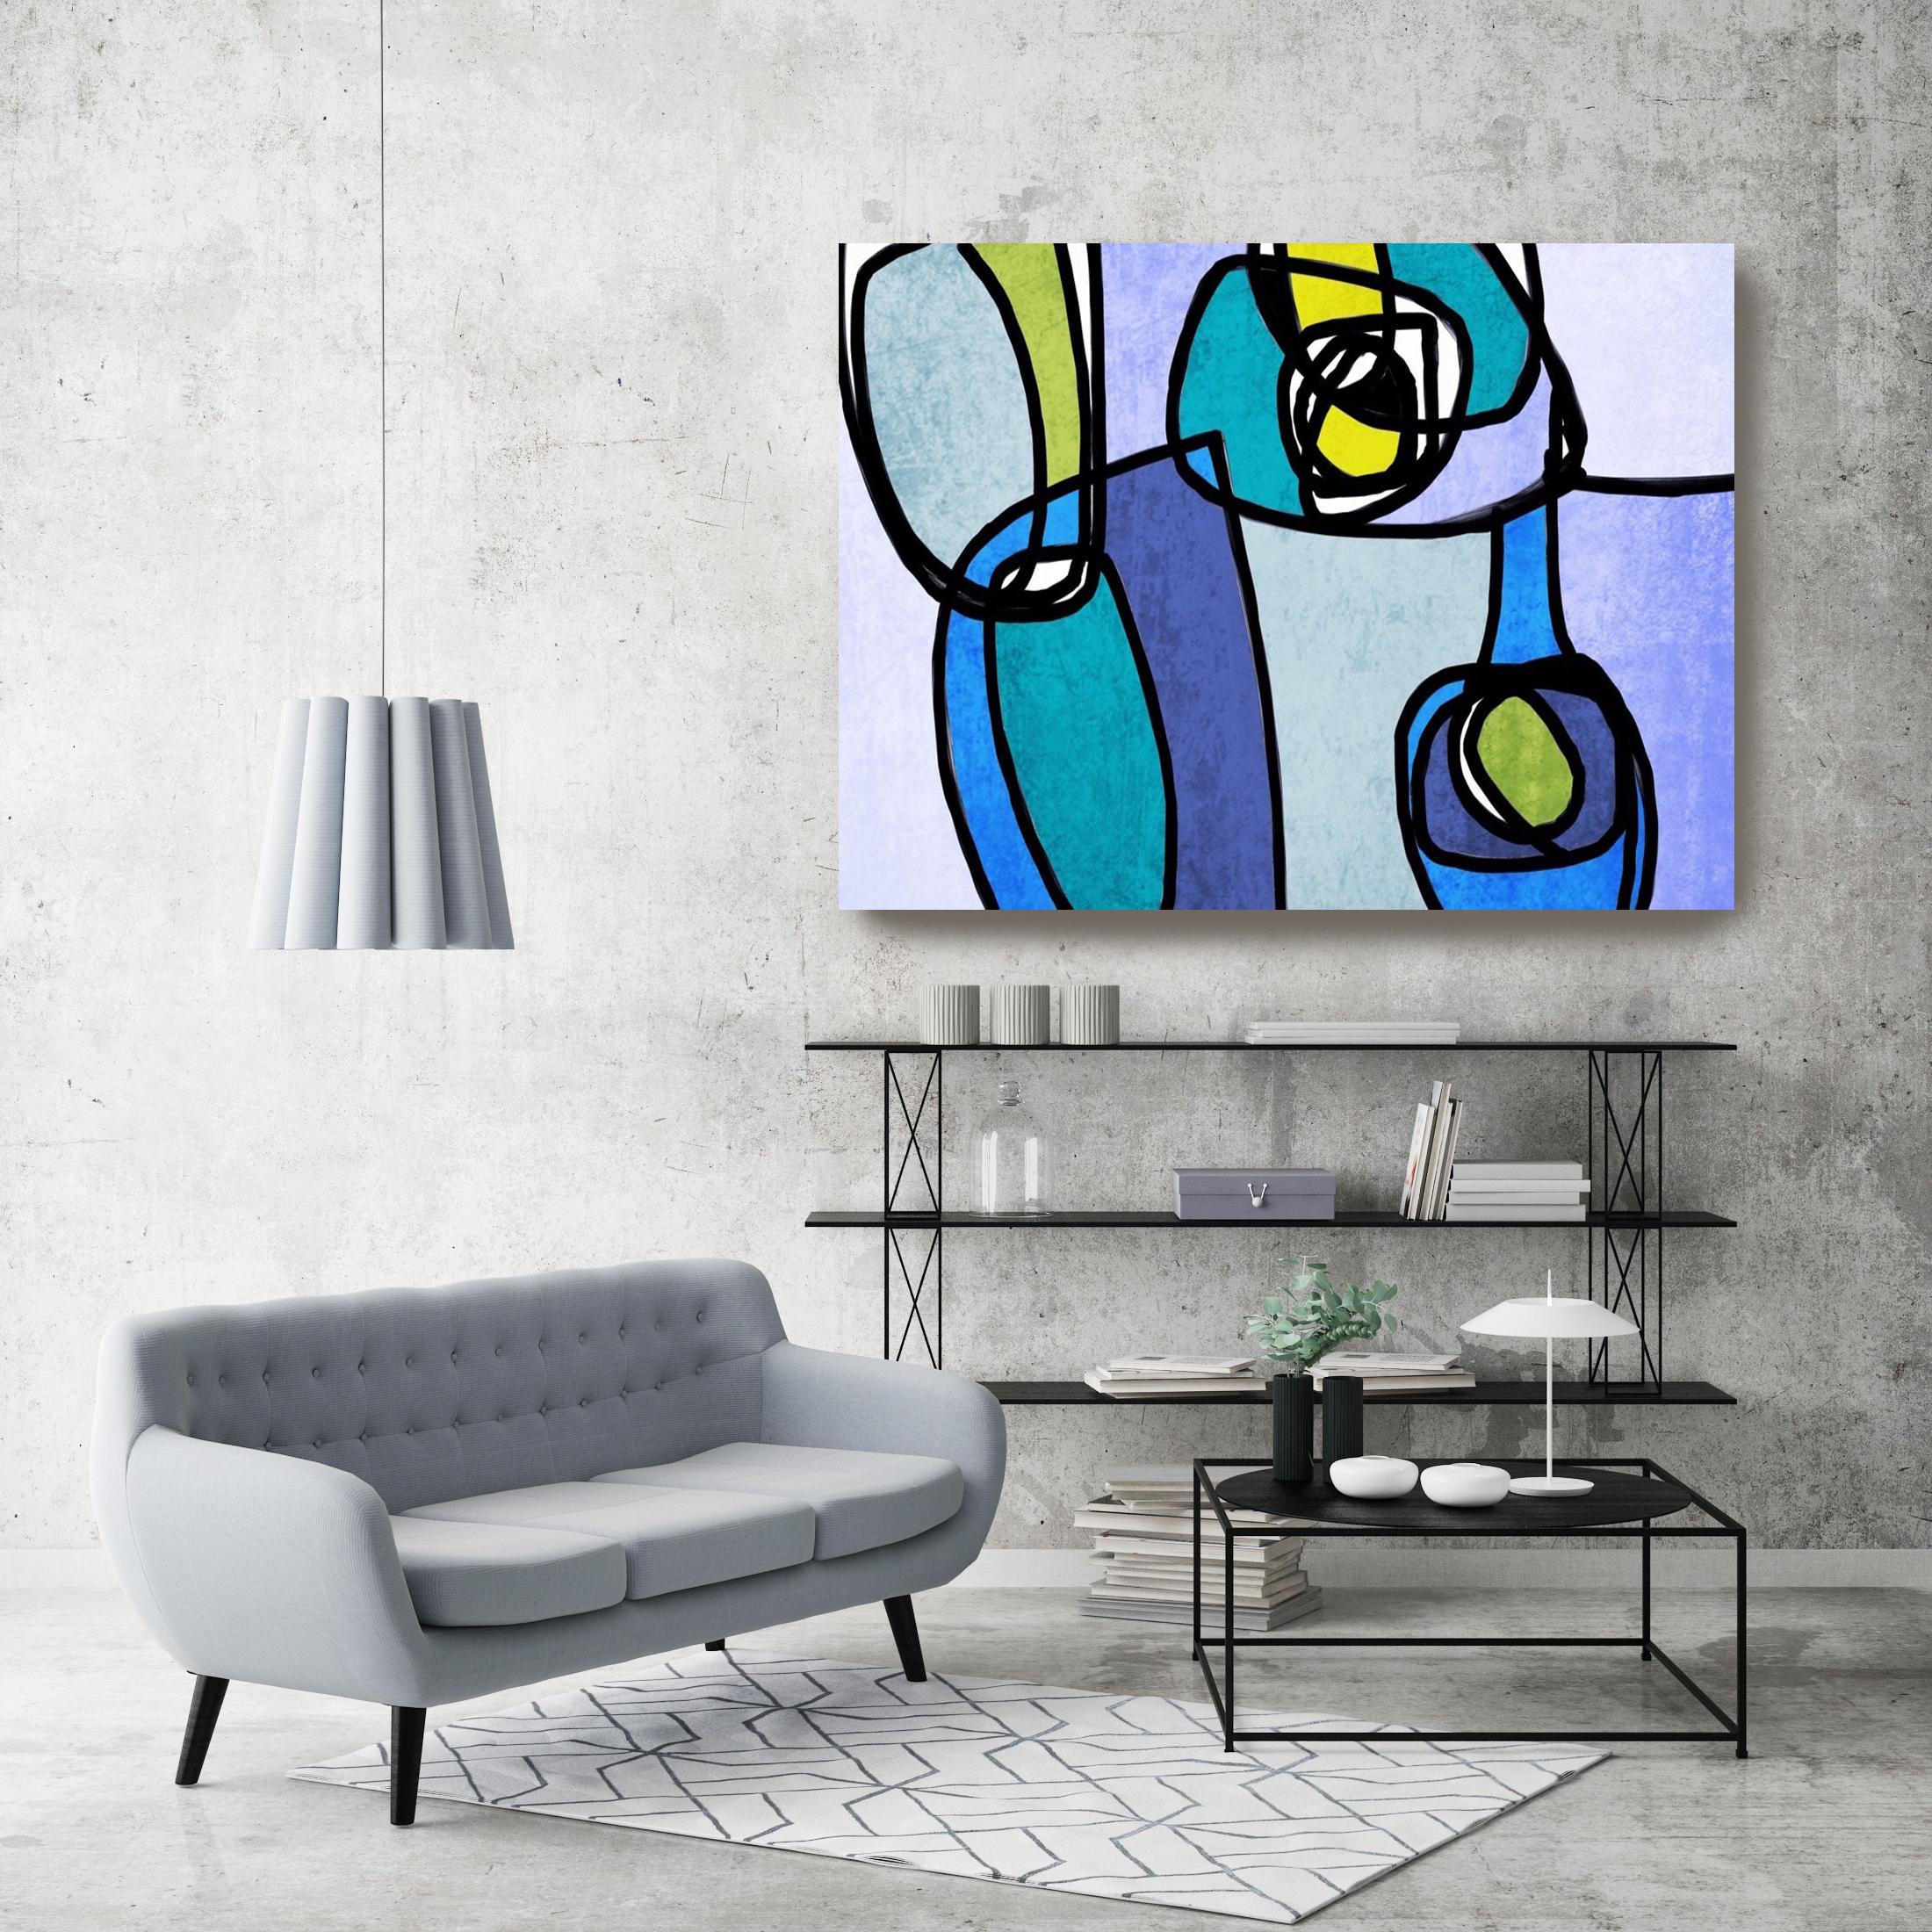 Blue Purple Mid-Century Modern Hand Embellished Giclee on Canvas 
Vibrant Colorful Abstract-0-5-1

State-of-the-art HAND EMBELLISHED ∽ MUSEUM QUALITY ∽ DISPLAY READY Giclee Reproduction
Each limited edition Giclee is hand embellished by the artist,